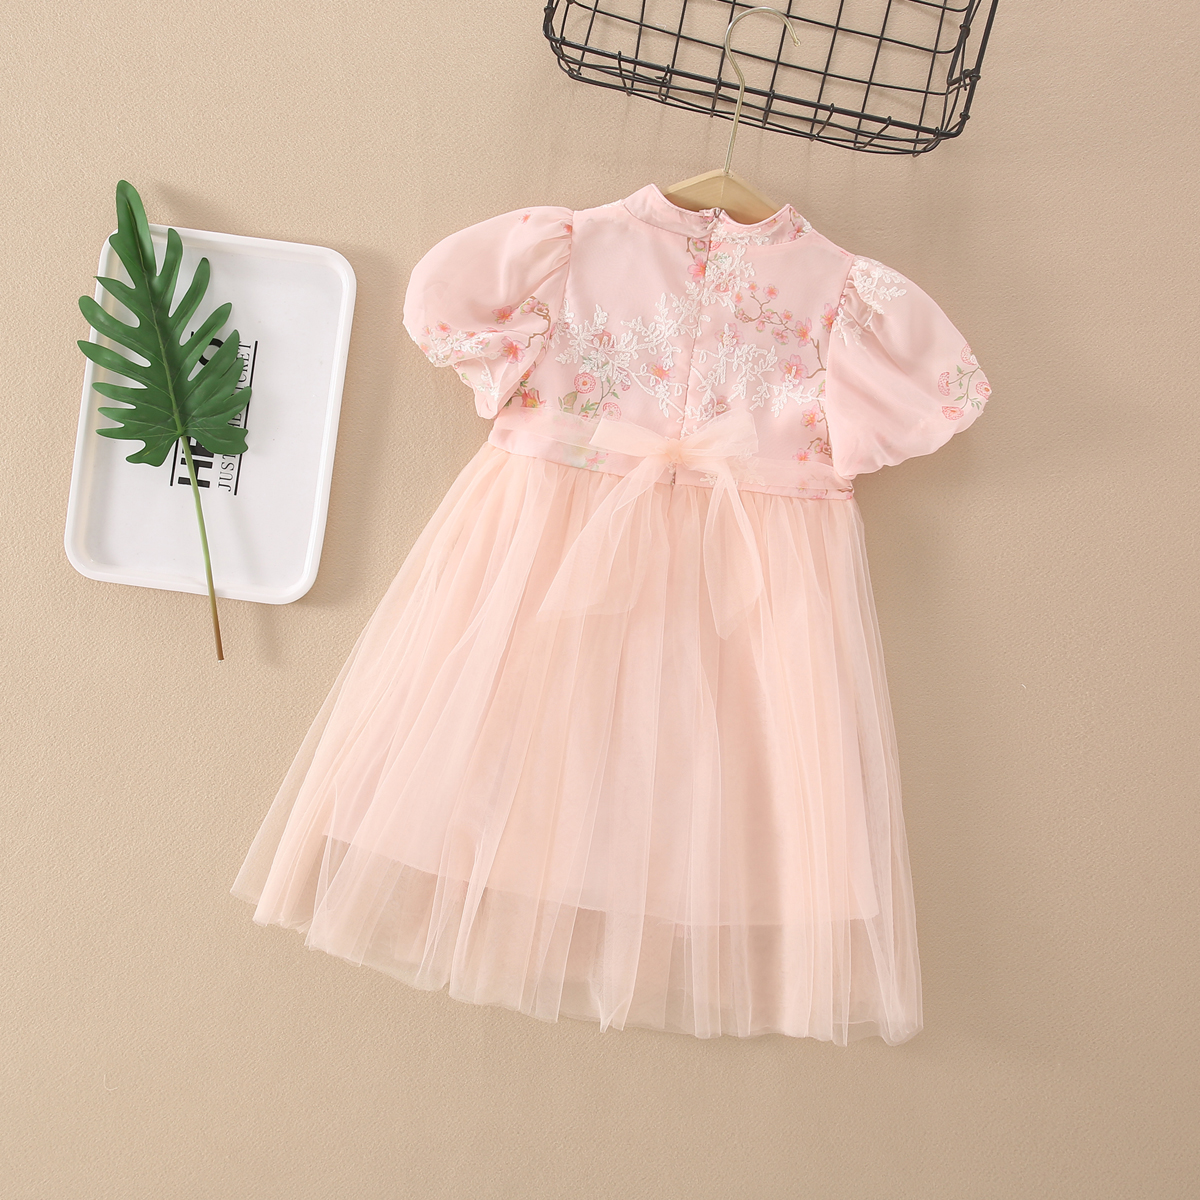 Chinese style dress Cheongsam qipao pink little girls best place to buy kids cloths free sample